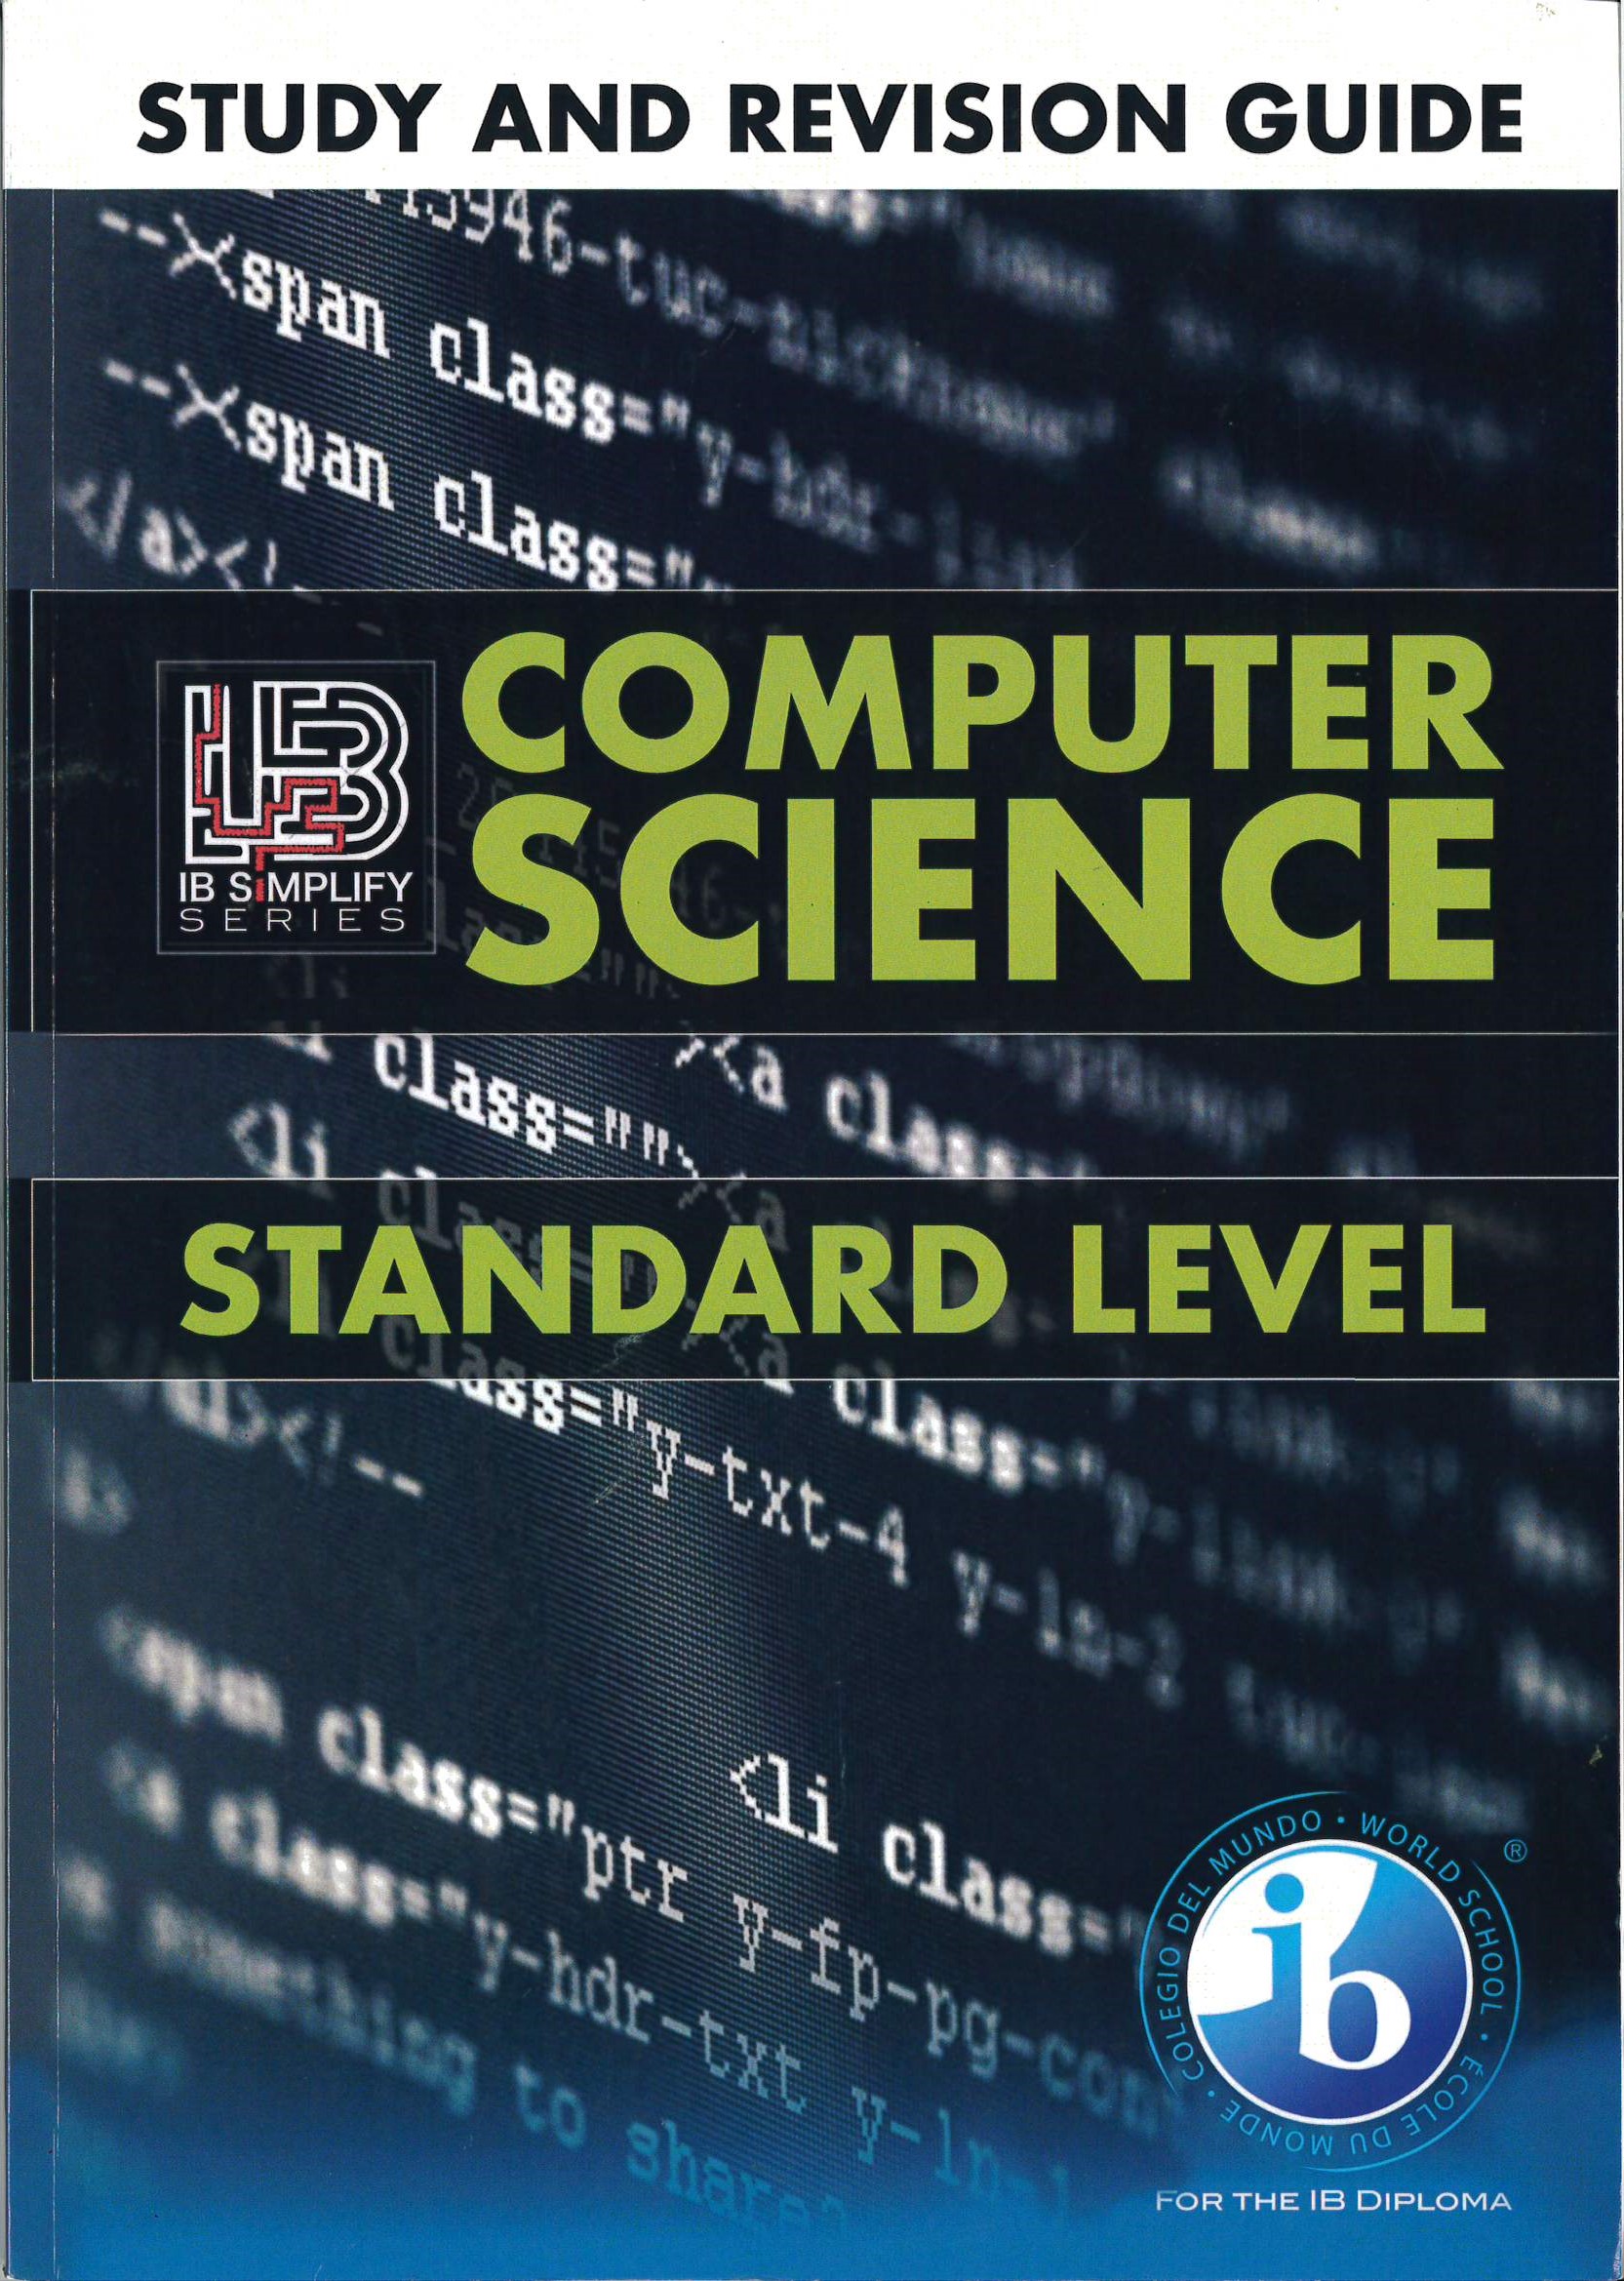 Computer science for the IB diploma (standard level)